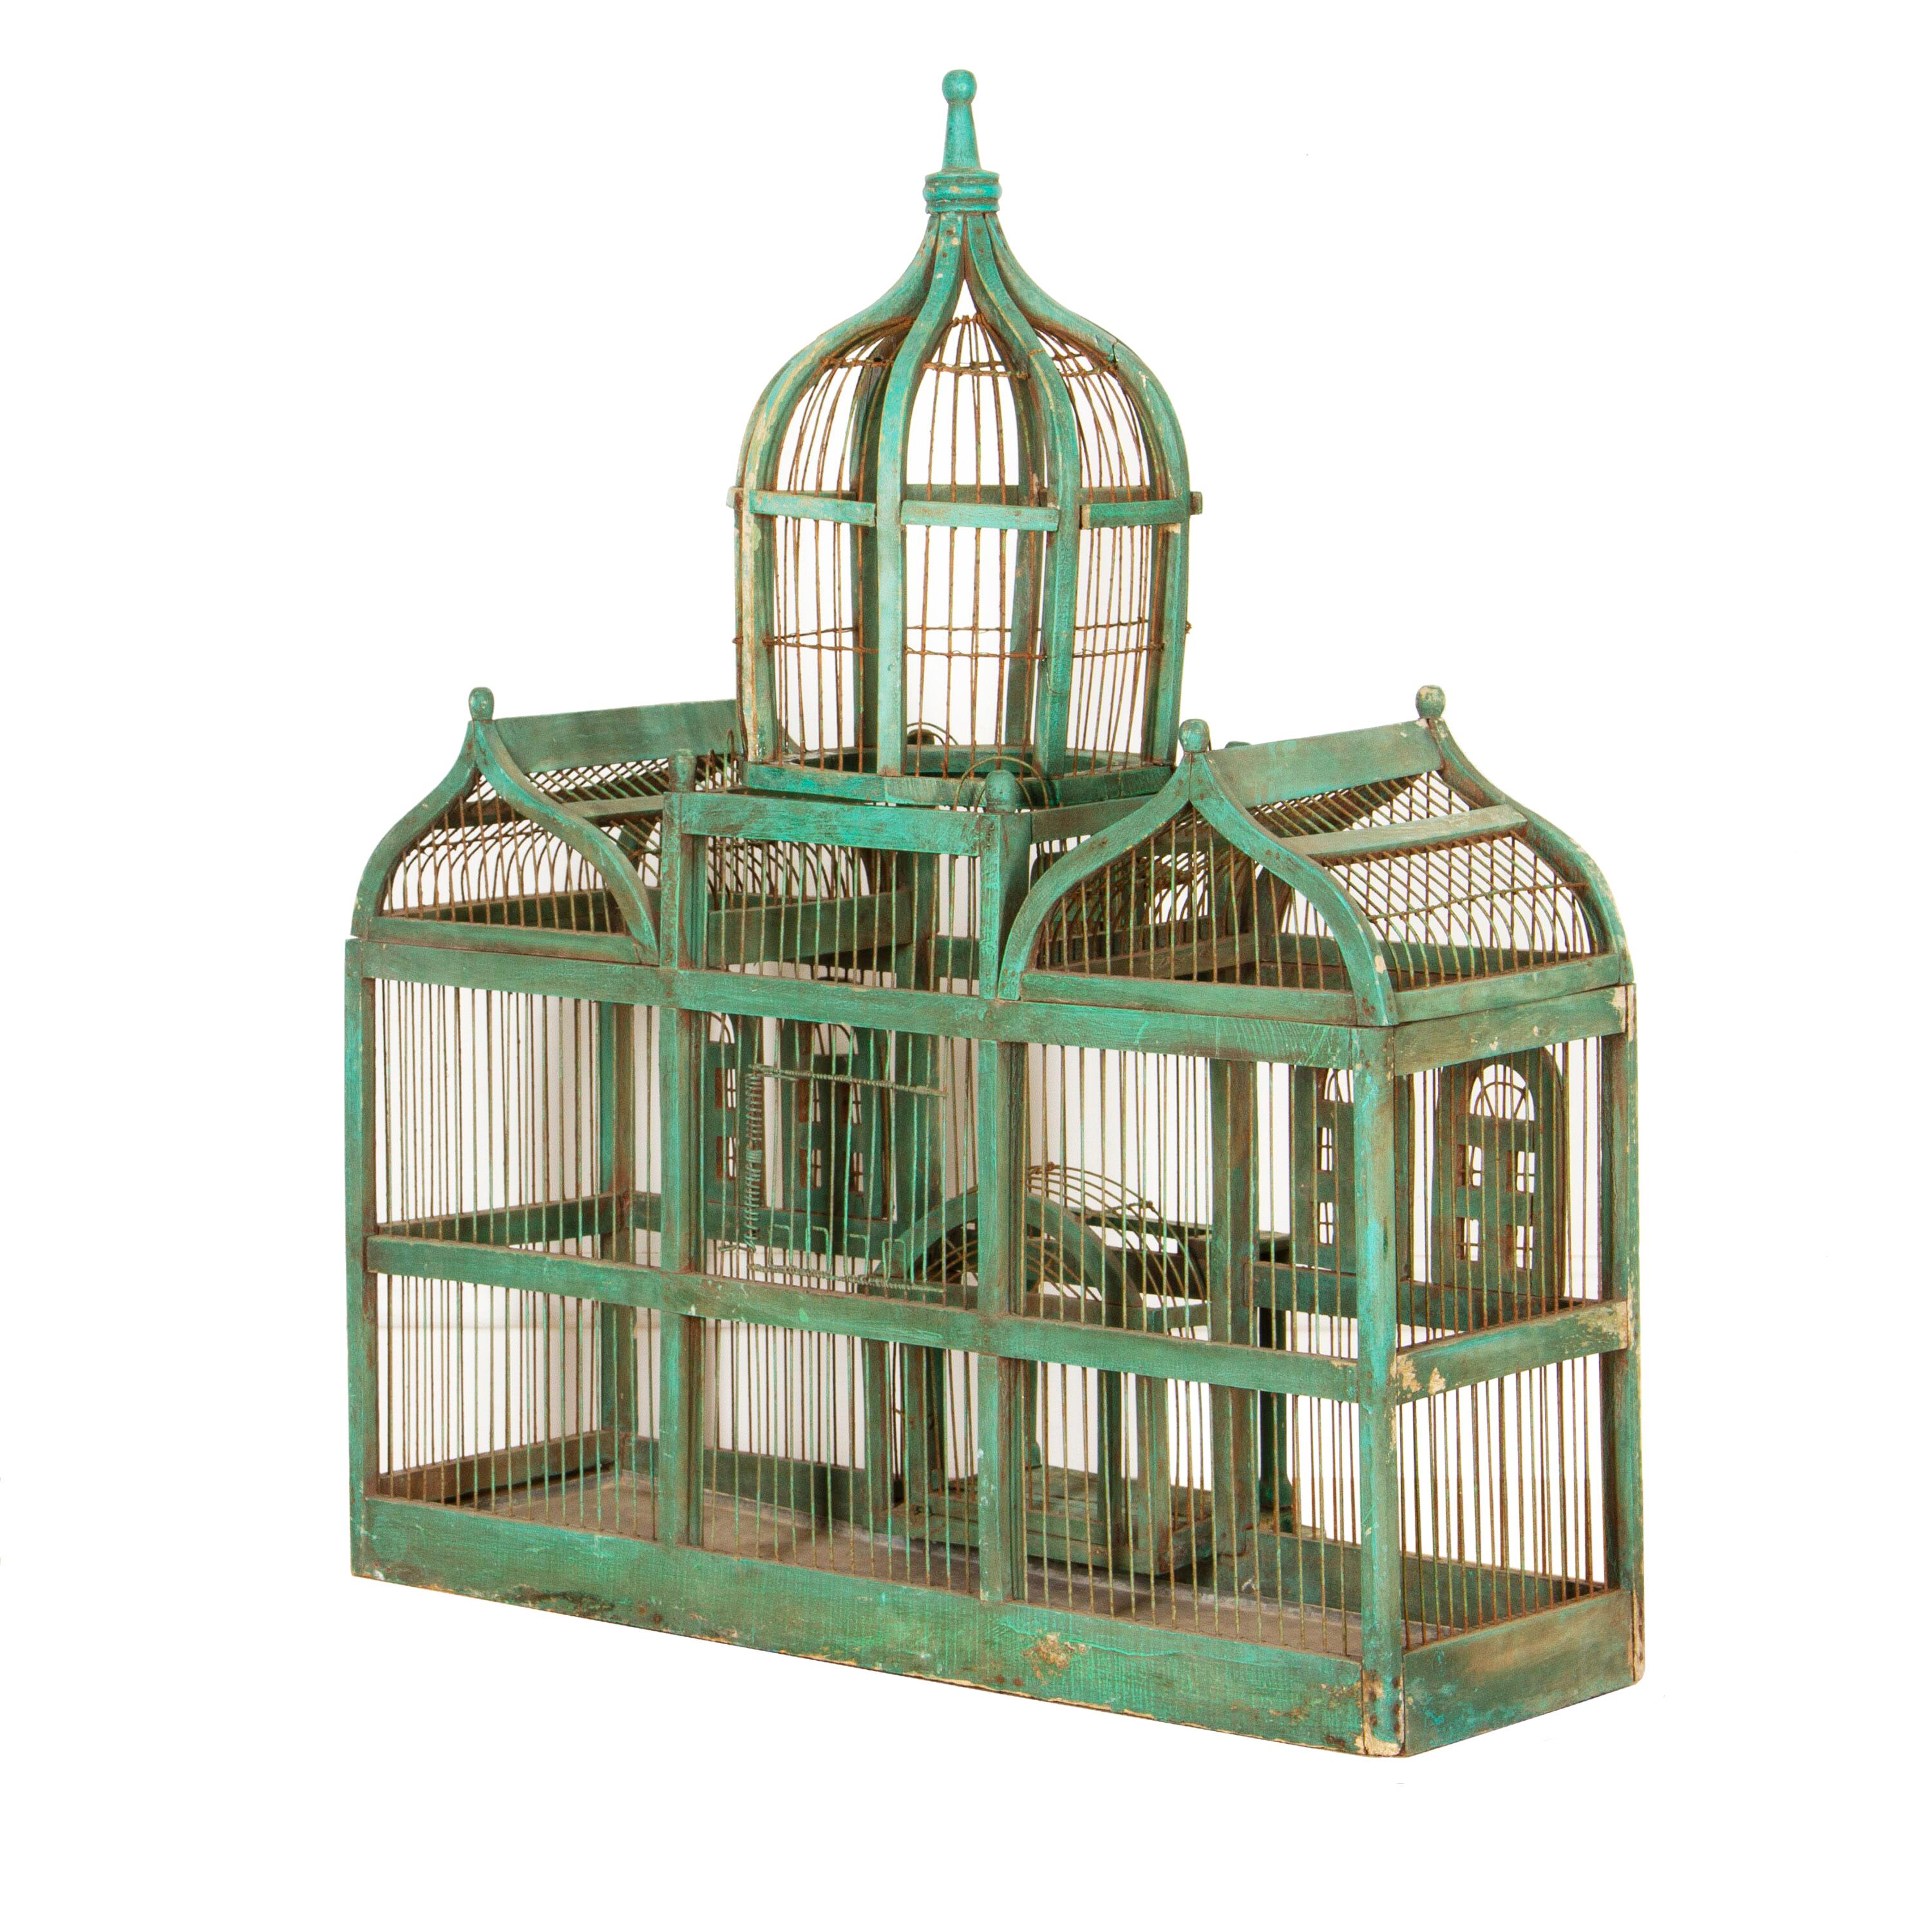 Charming Victorian birdcage in the style of the Taj Mahal. This birdcage has been constructed from painted wood and wire. It has three domes to the top, a working porch door, and another door to the back. At the very bottom of this birdcage is its